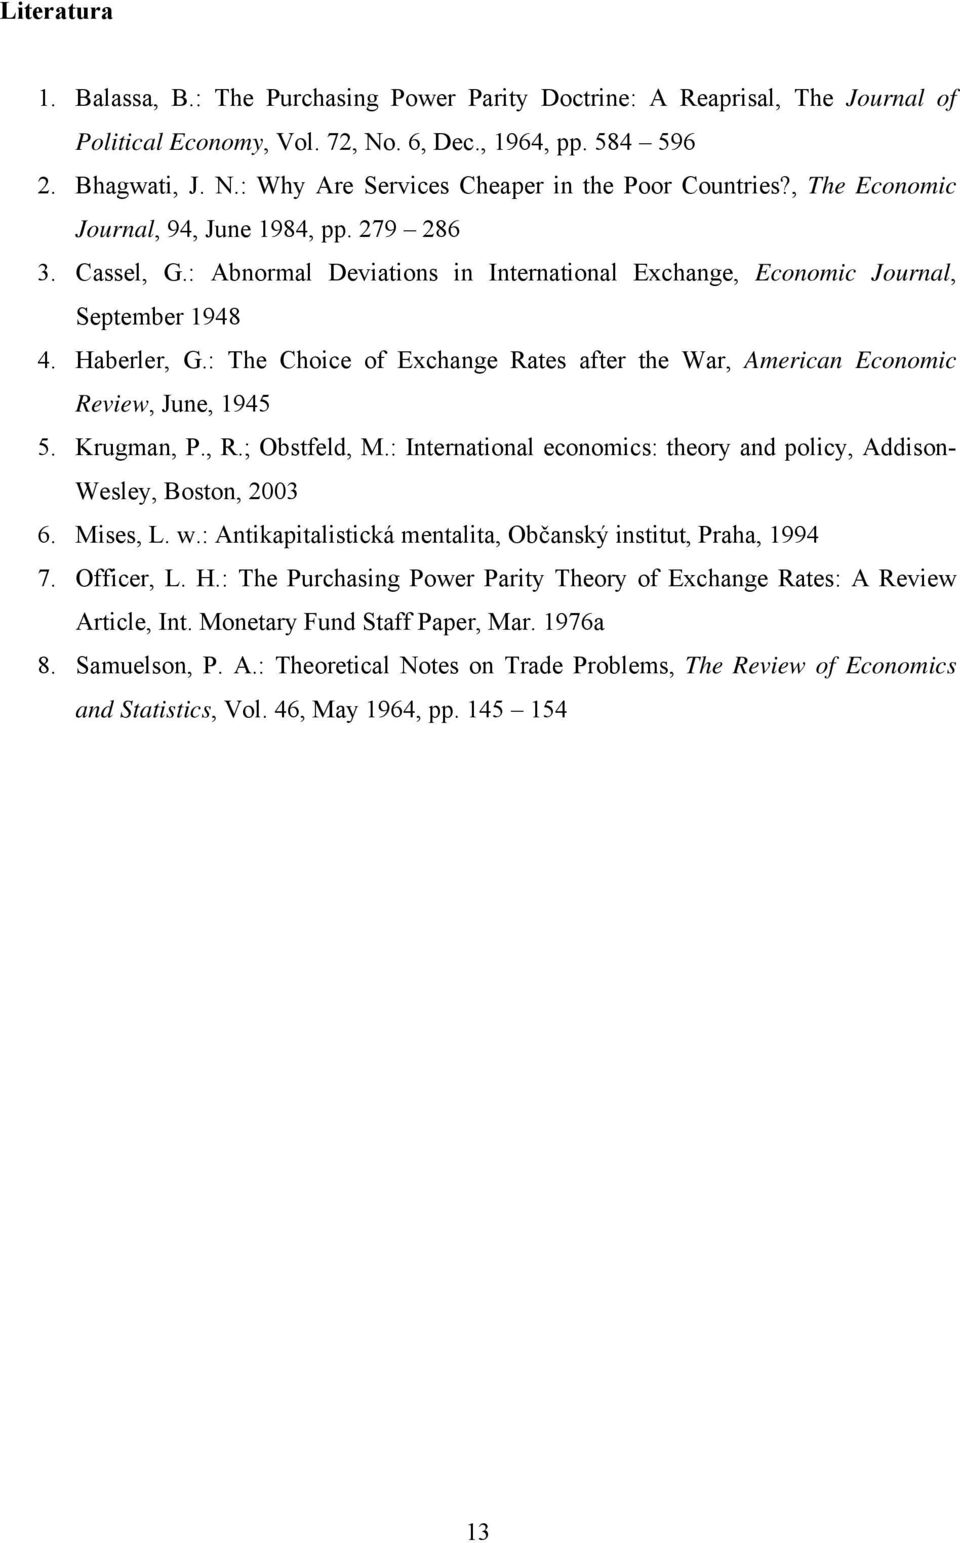 : The Choice of Exchange Rates after the War, American Economic Review, June, 1945 5. Krugman, P., R.; Obstfeld, M.: International economics: theory and policy, Addison- Wesley, Boston, 2003 6.